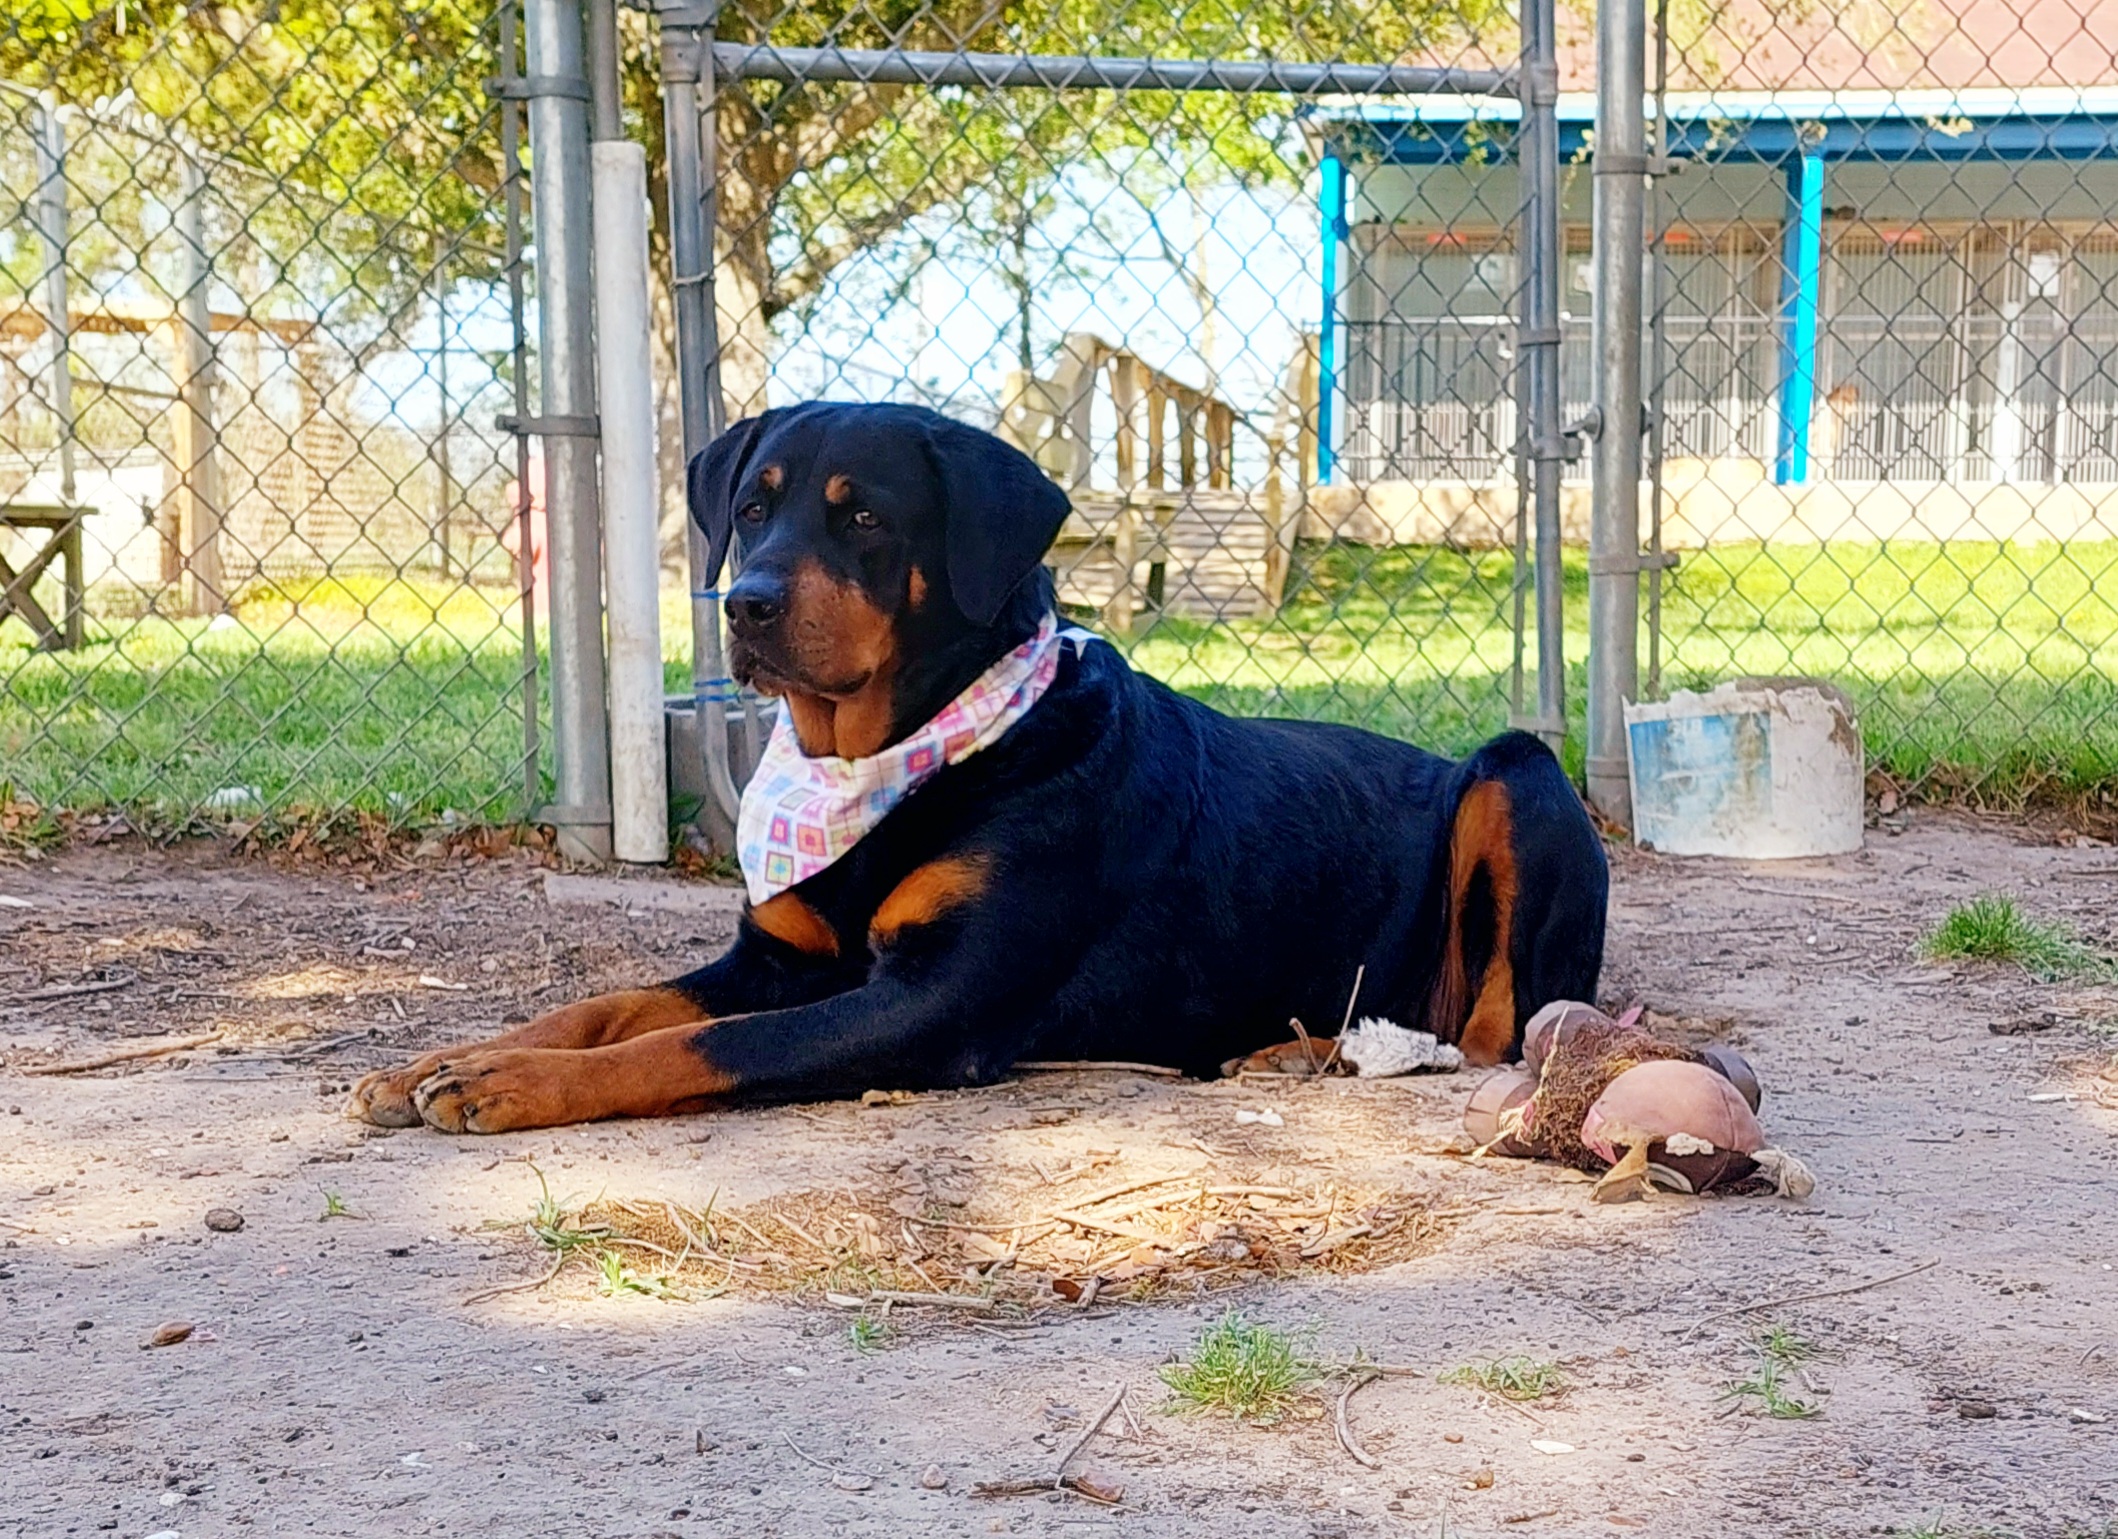 A Rottweiler wearing a pink scarf and lying on the ground